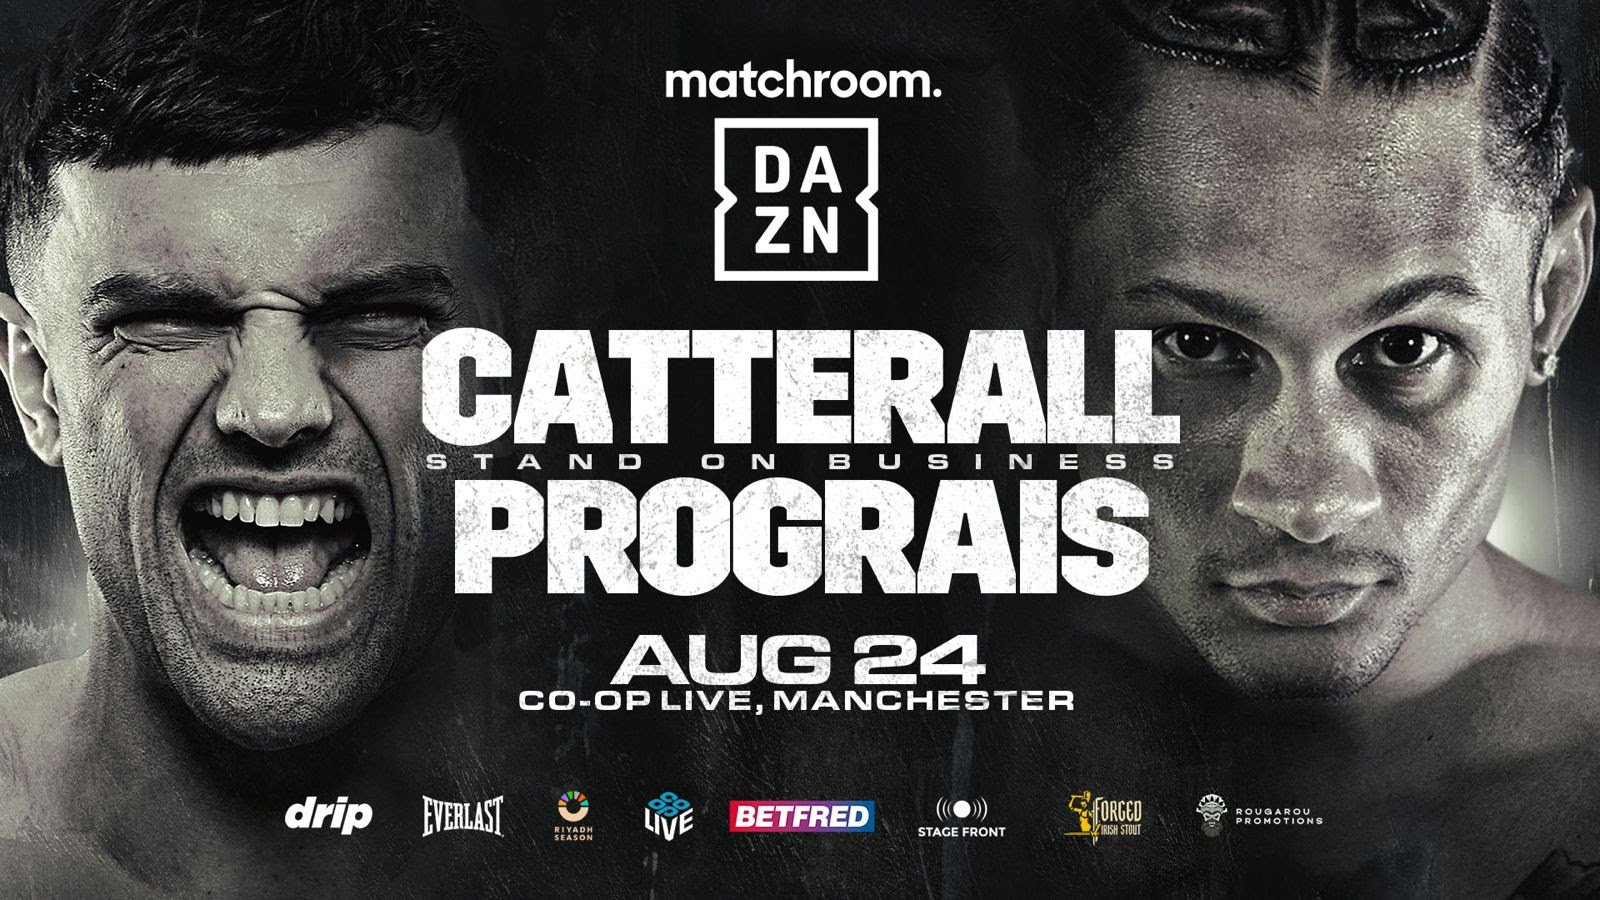 Jack Catterall-Regis Prograis Set, Aug. 24 On DAZN From Co-Op Live In Manchester